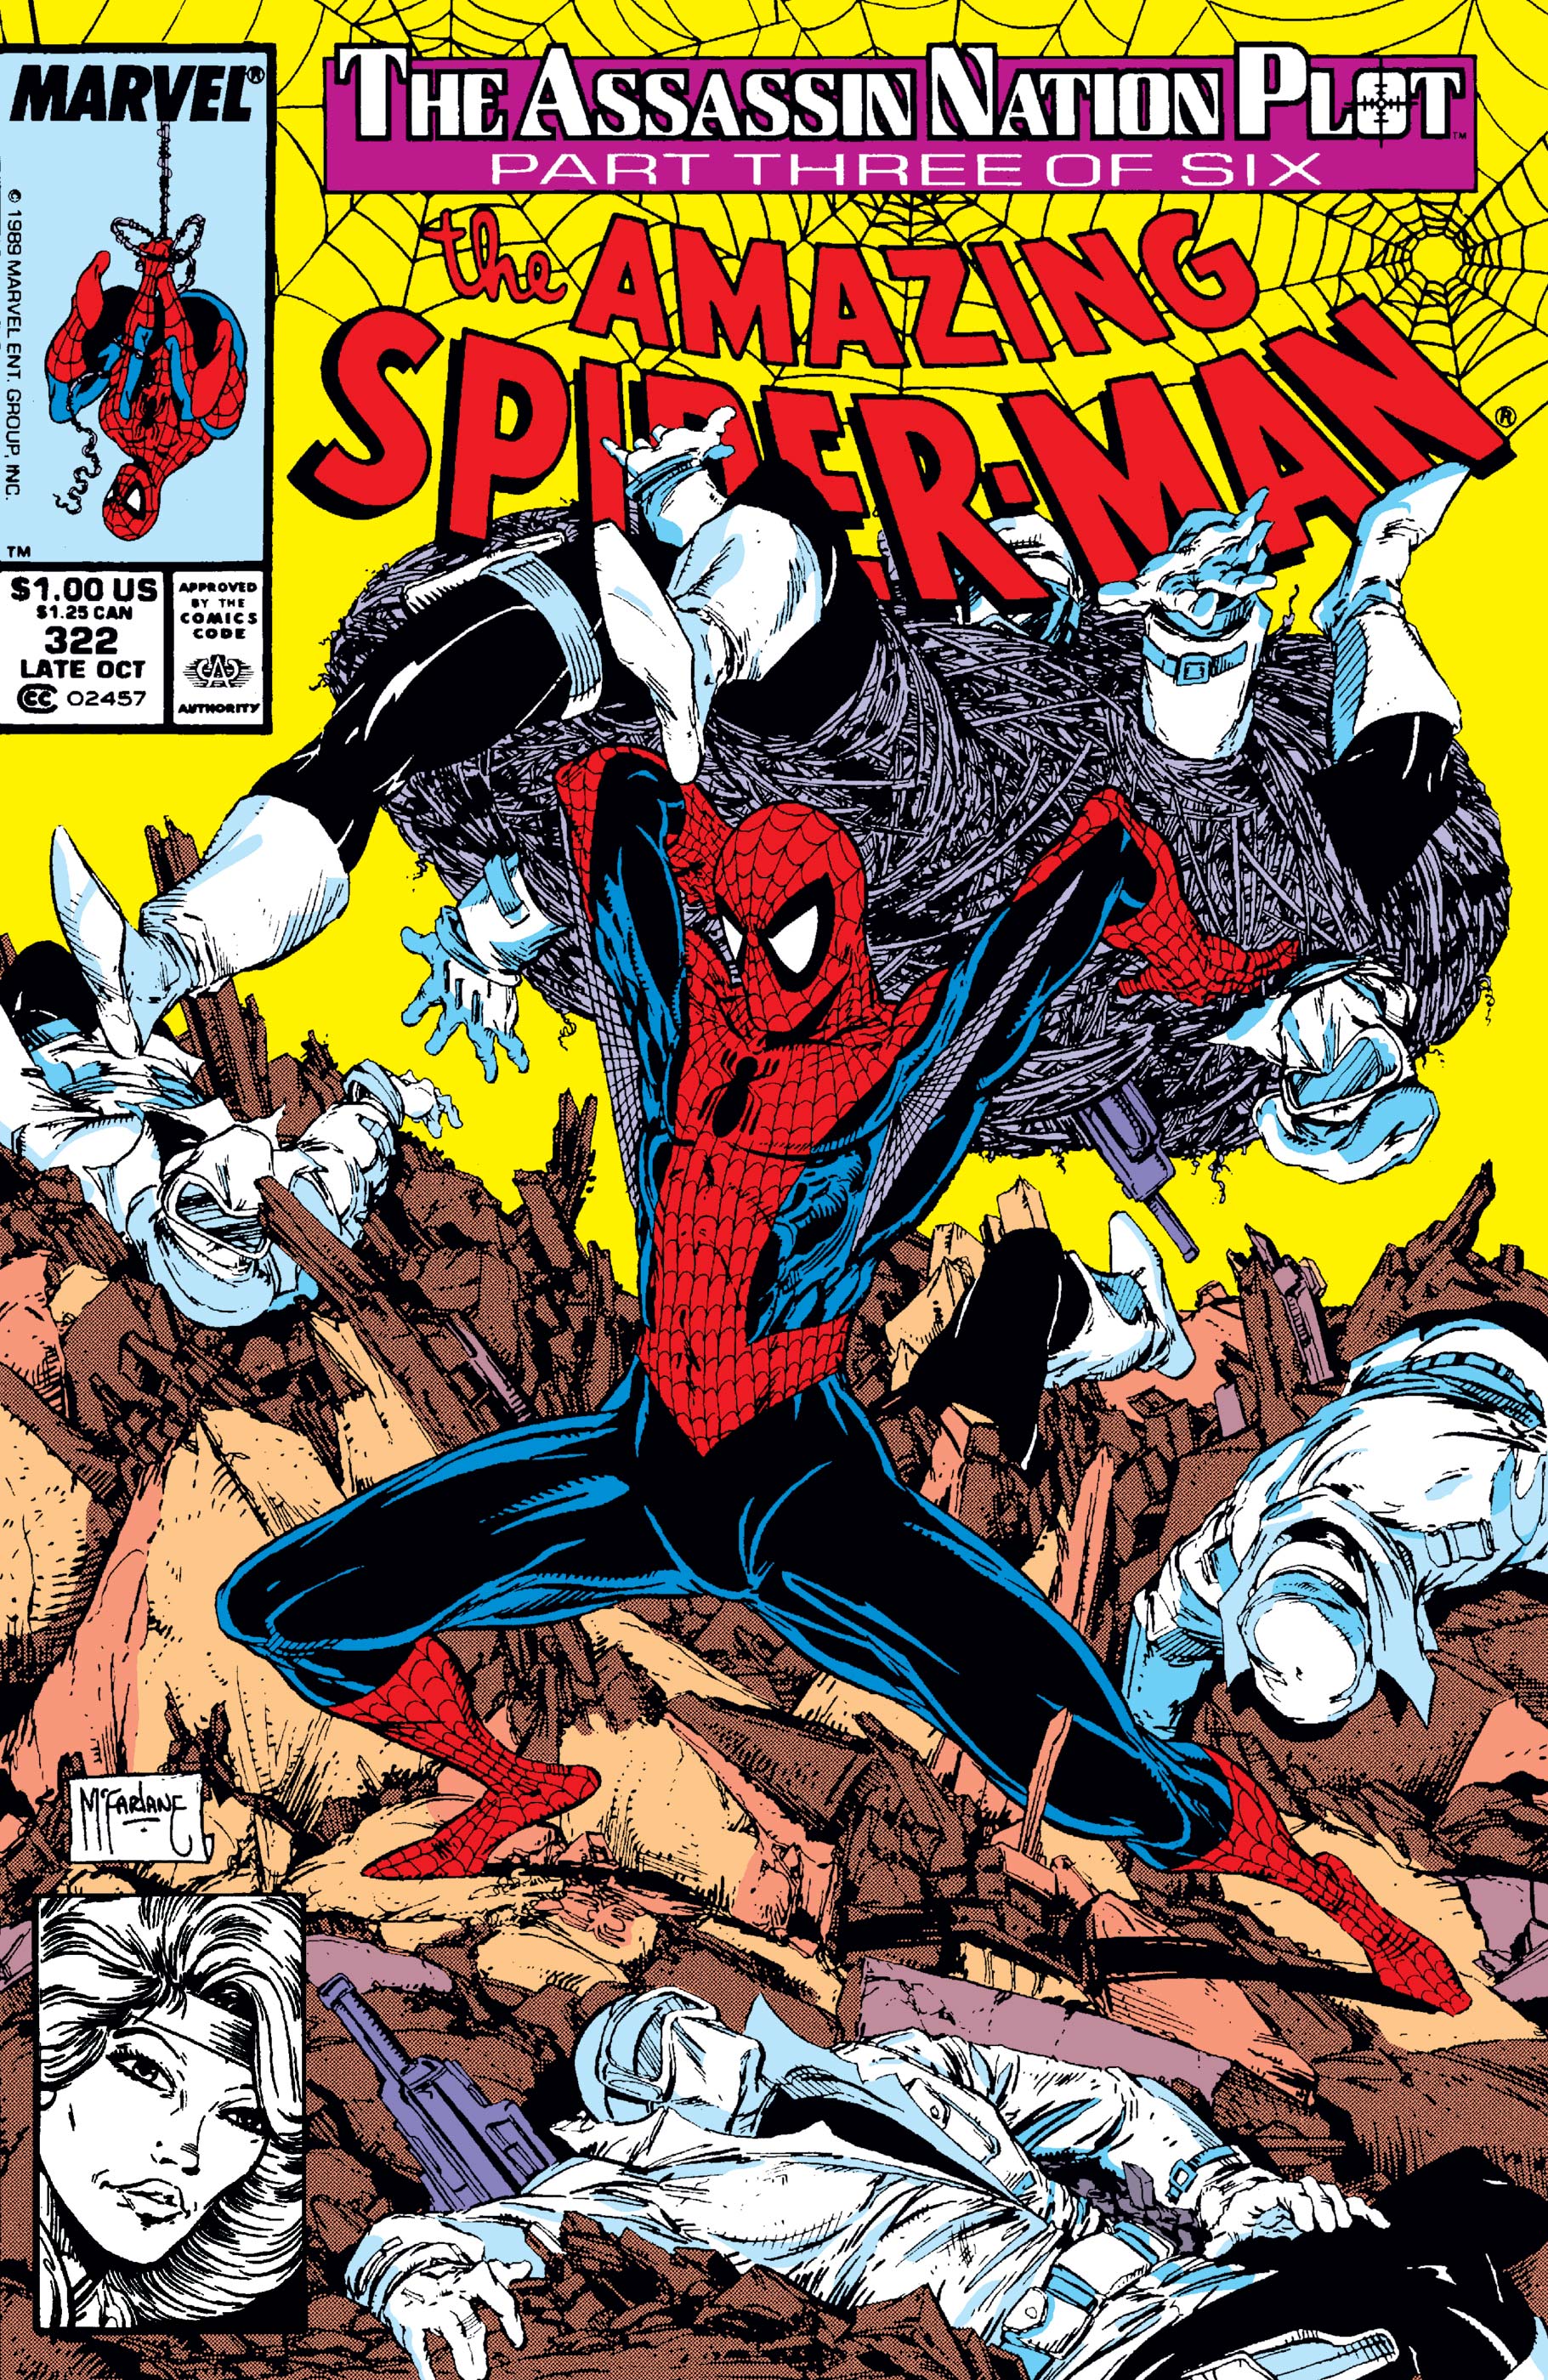 The Amazing Spider-Man (1963) #322 | Comic Issues | Marvel